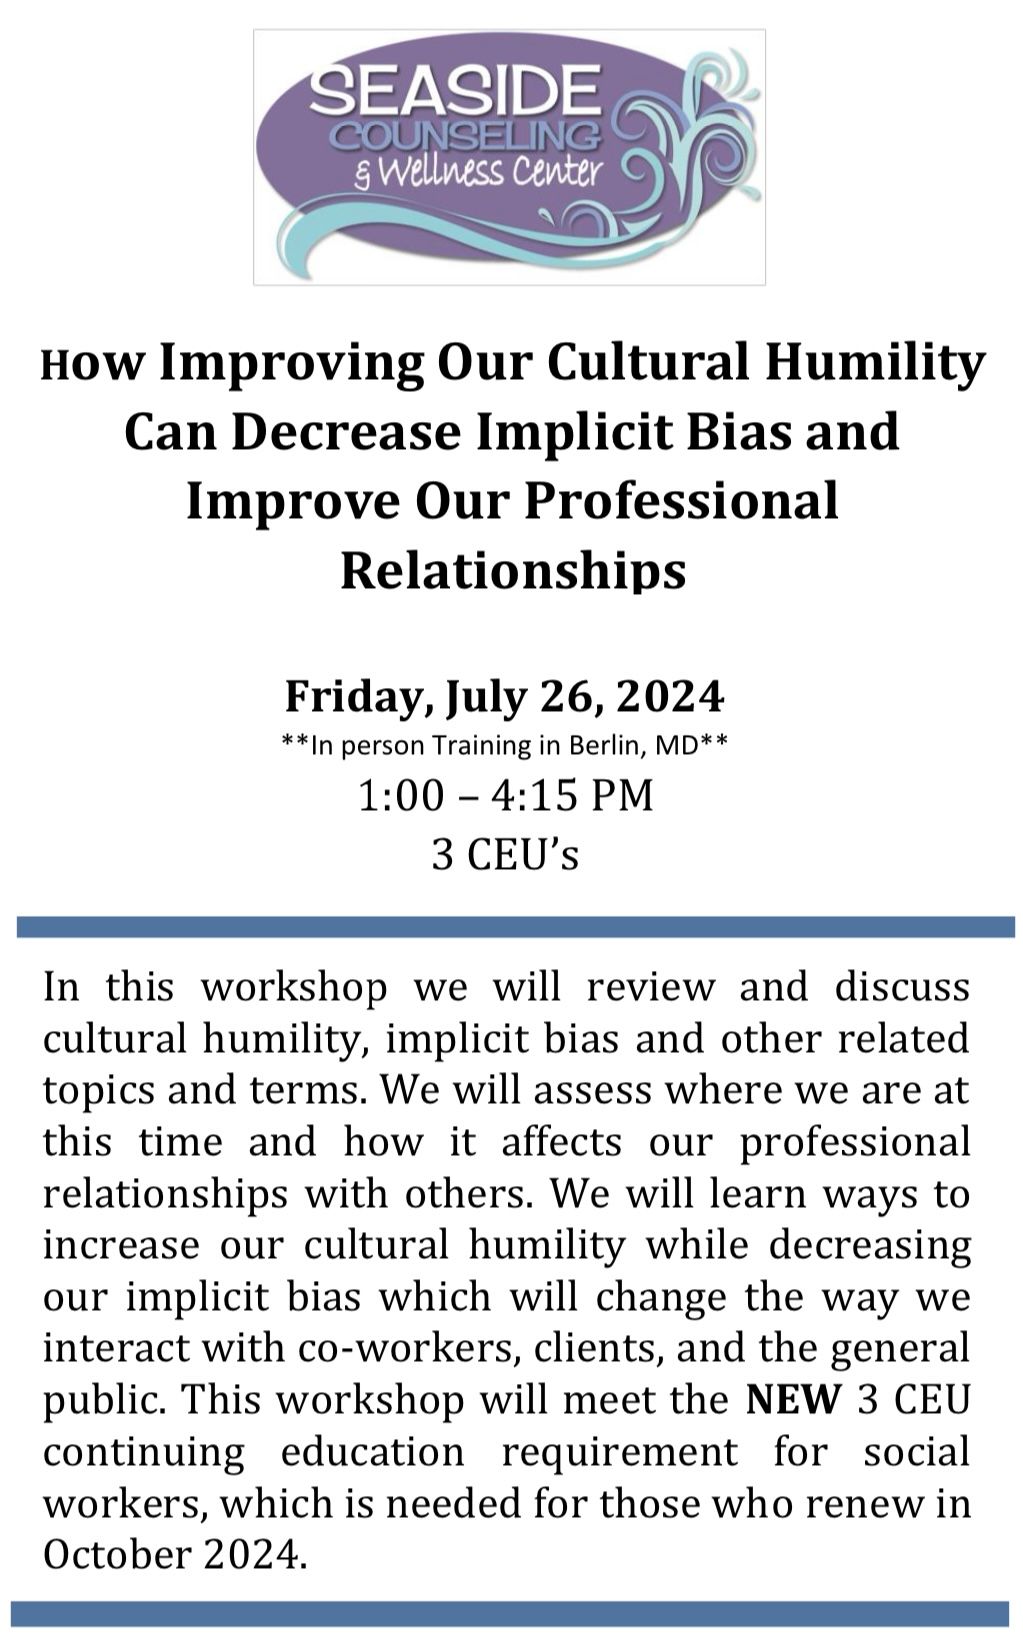 How Improving Our Cultural Humility Can Decrease Implicit Bias and Improve Professional Relationship